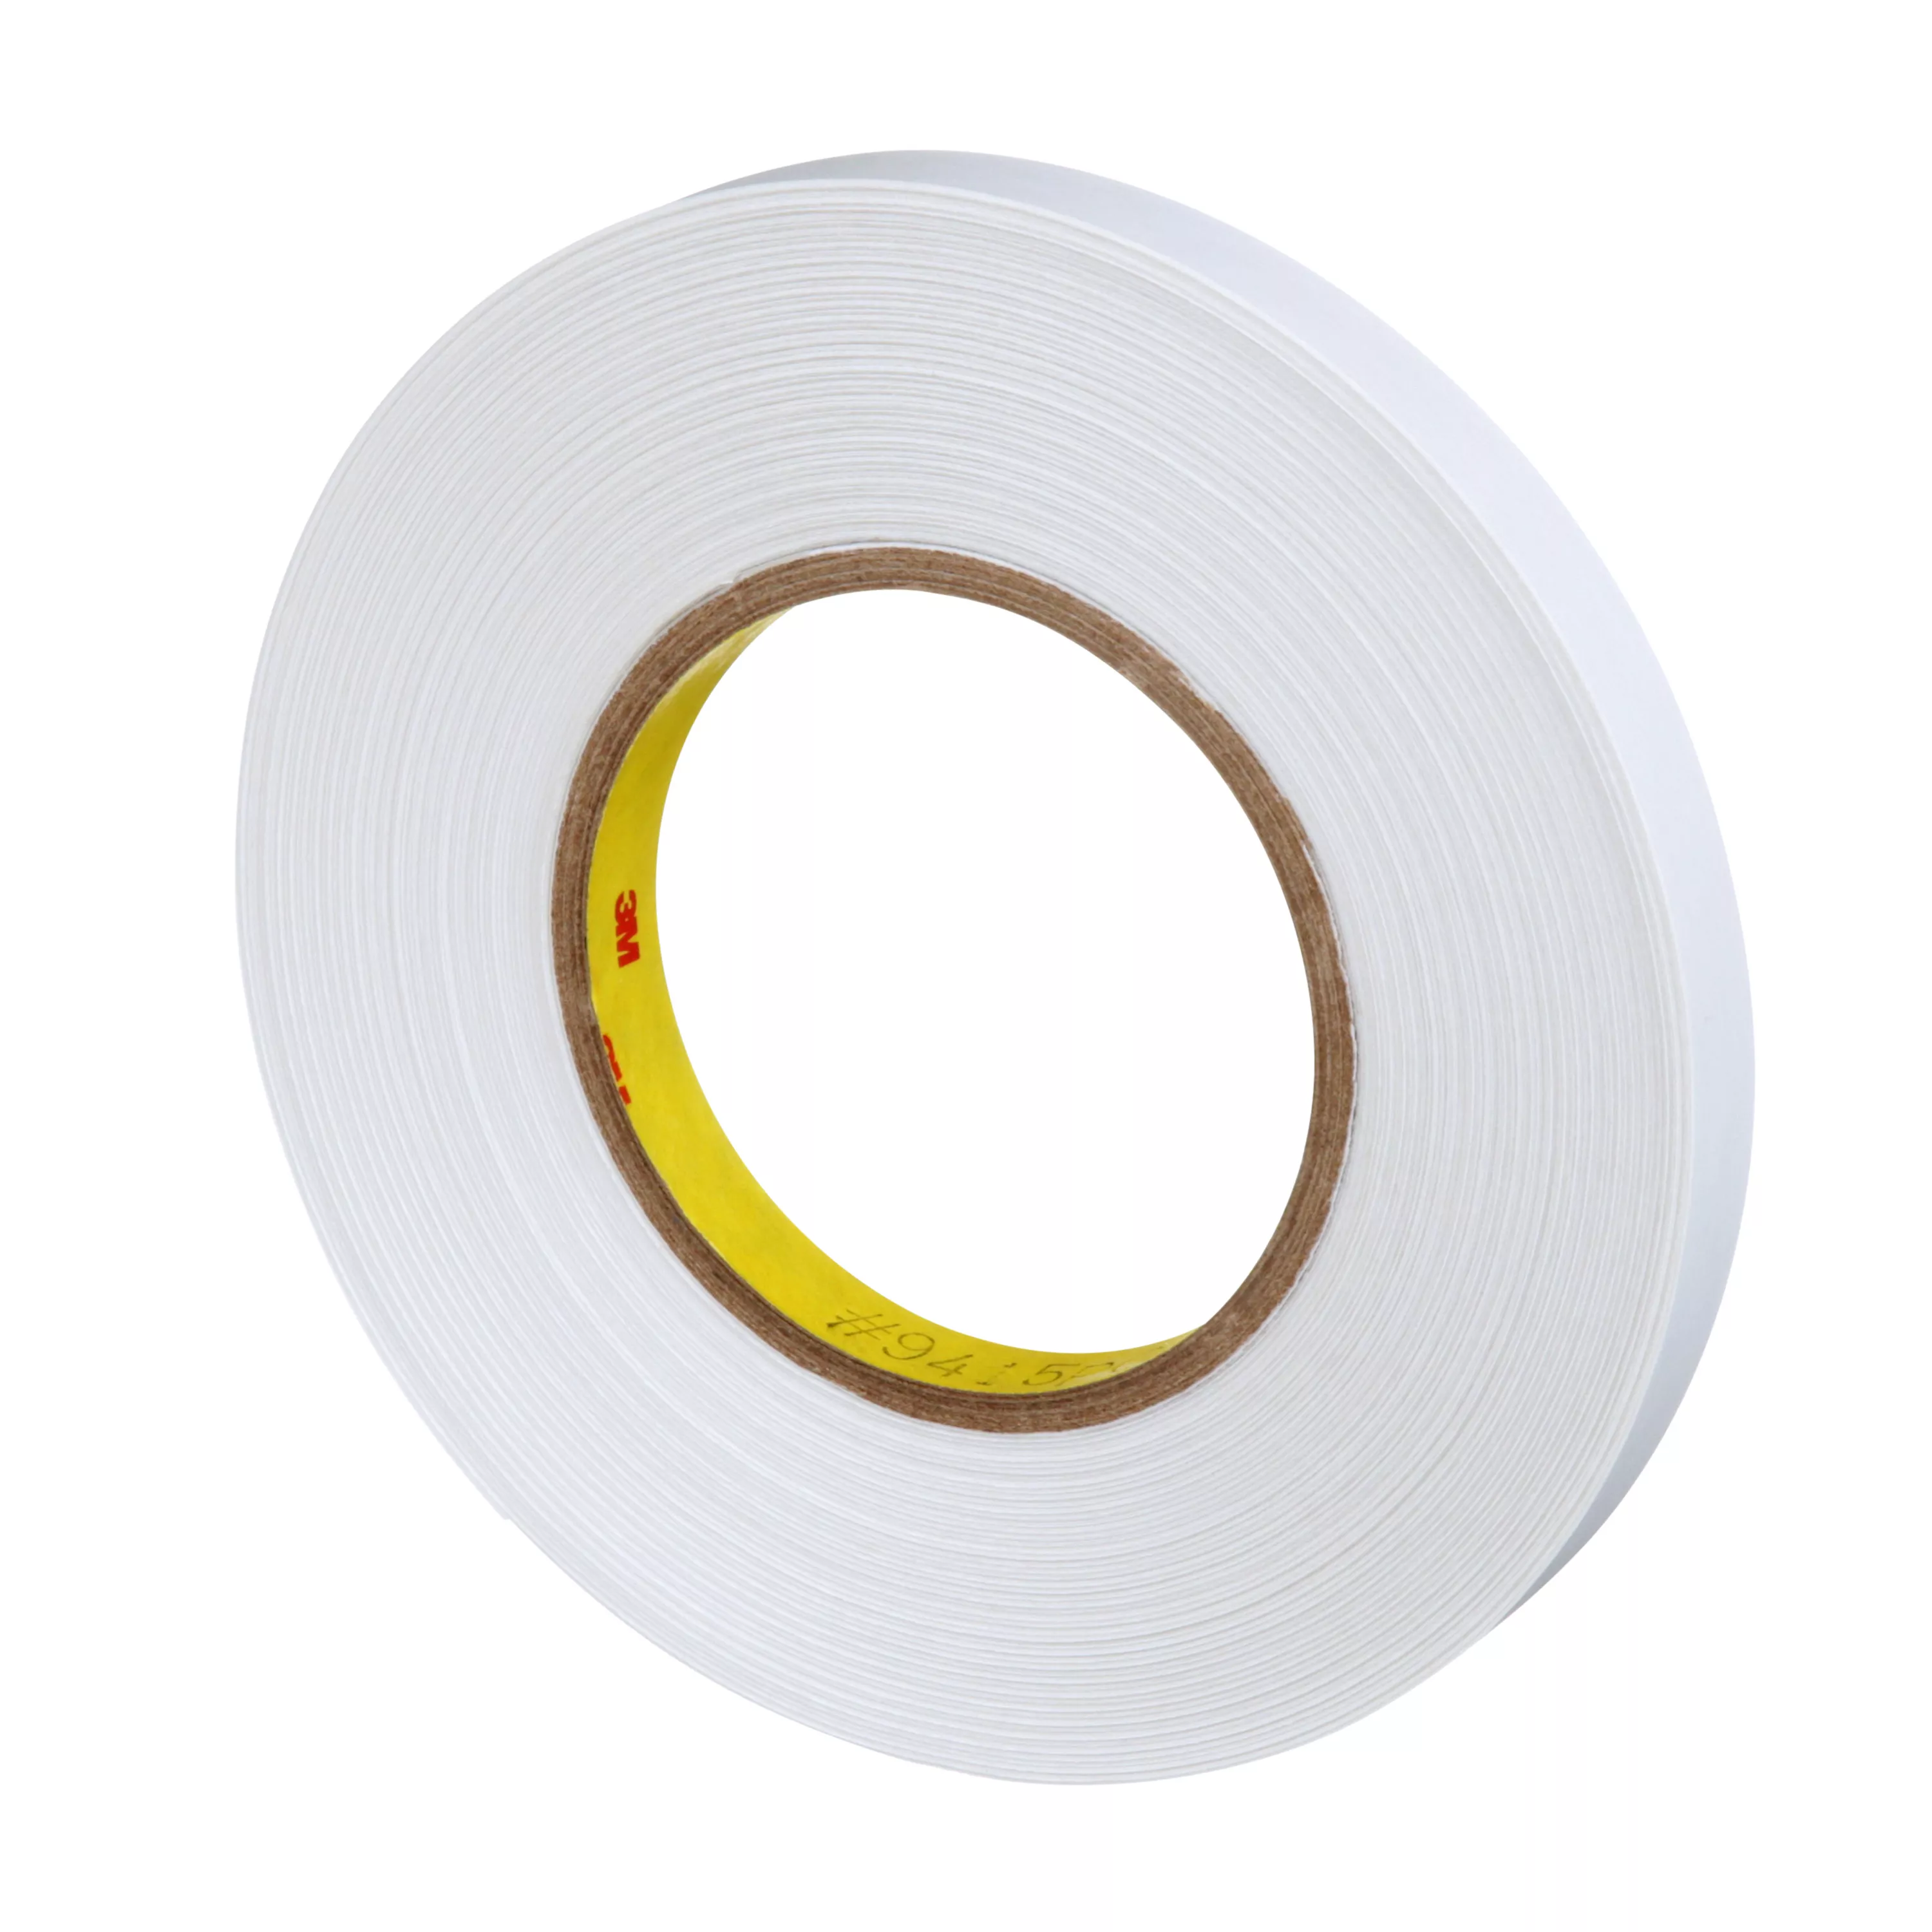 SKU 7000028937 | 3M™ Removable Repositionable Tape 9415PC